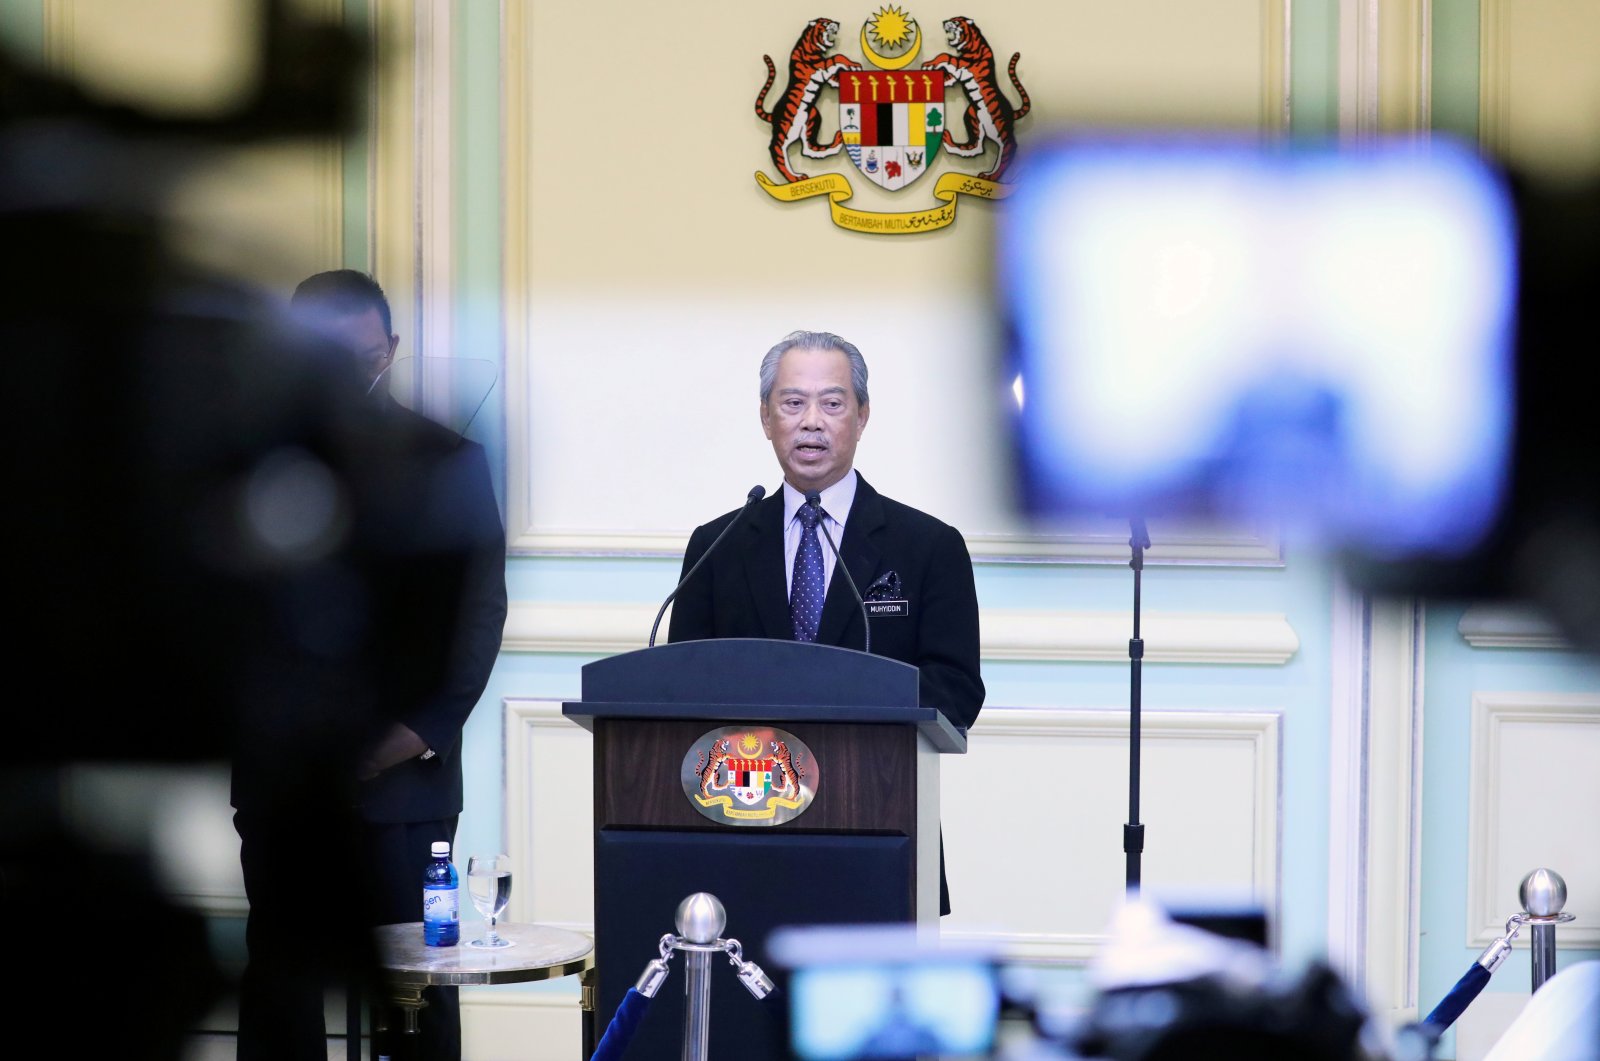 Malaysia's Prime Minister Muhyiddin Yassin speaking during his cabinet announcement in Putrajaya, Malaysia March 9, 2020. (Reuters Photo)